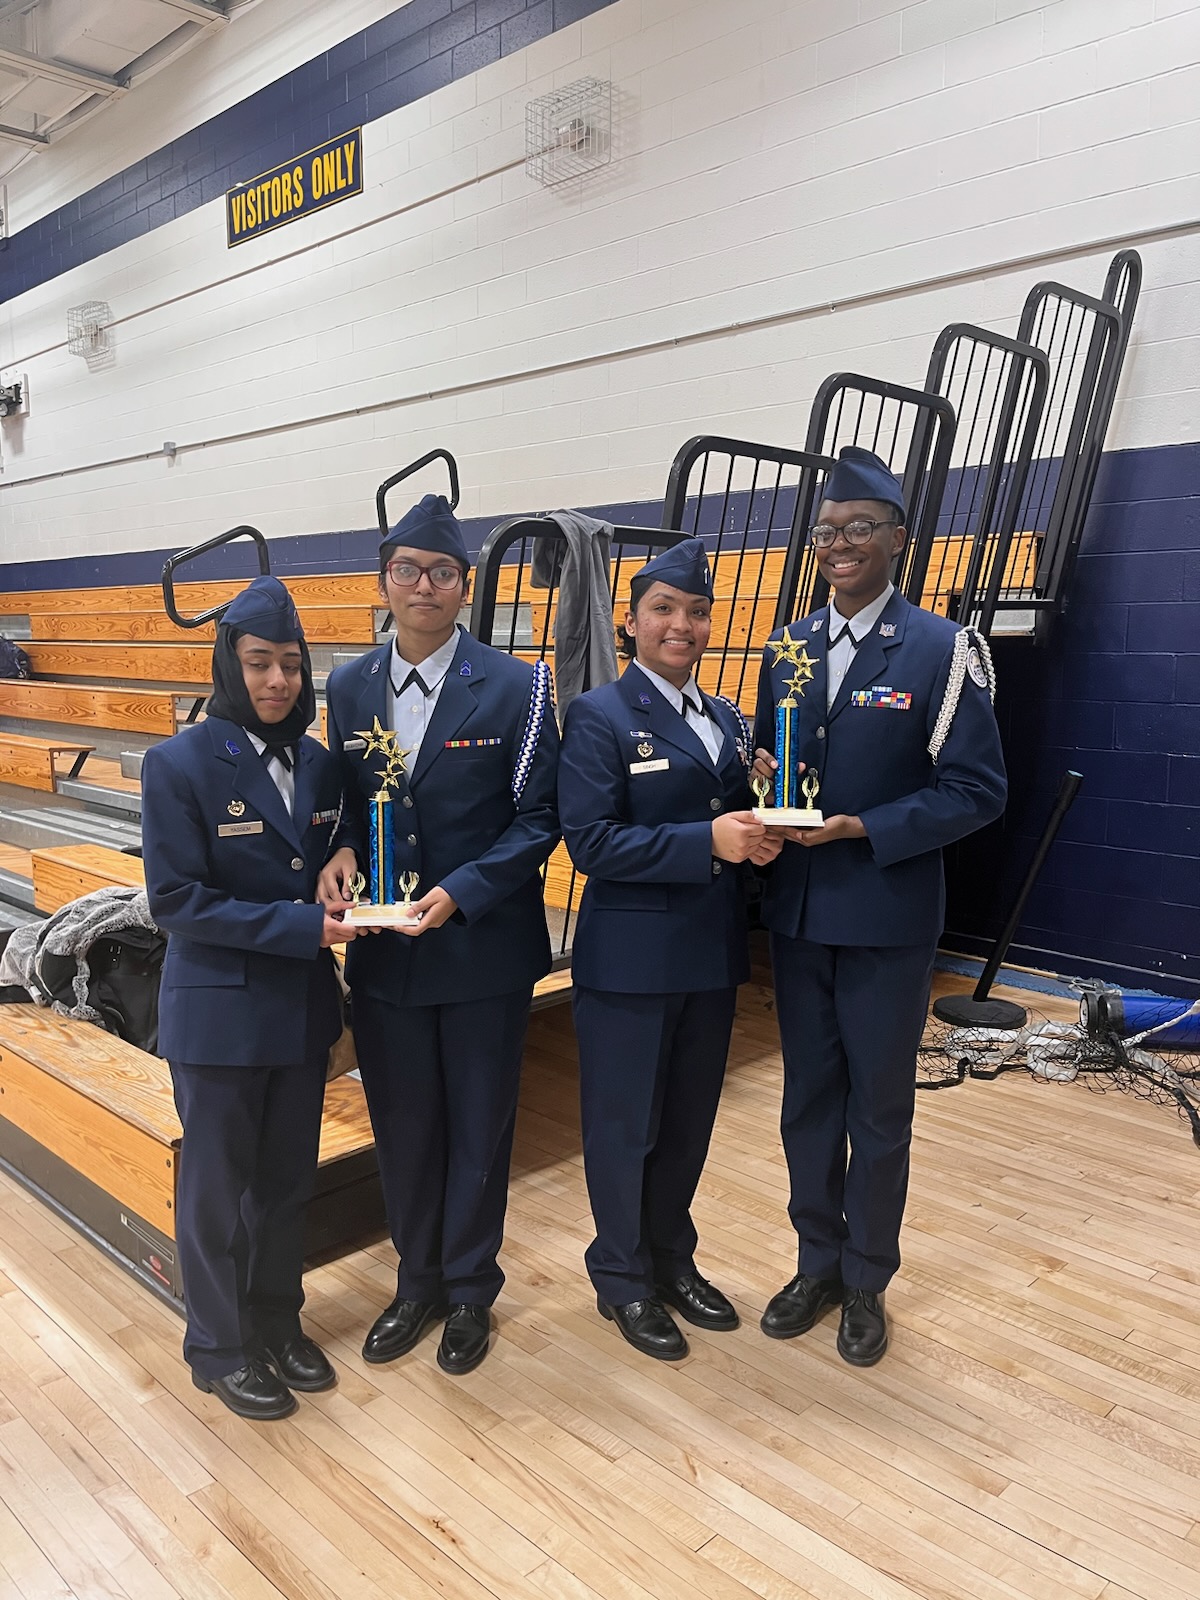 JROTC came in first and second in a drill competiton